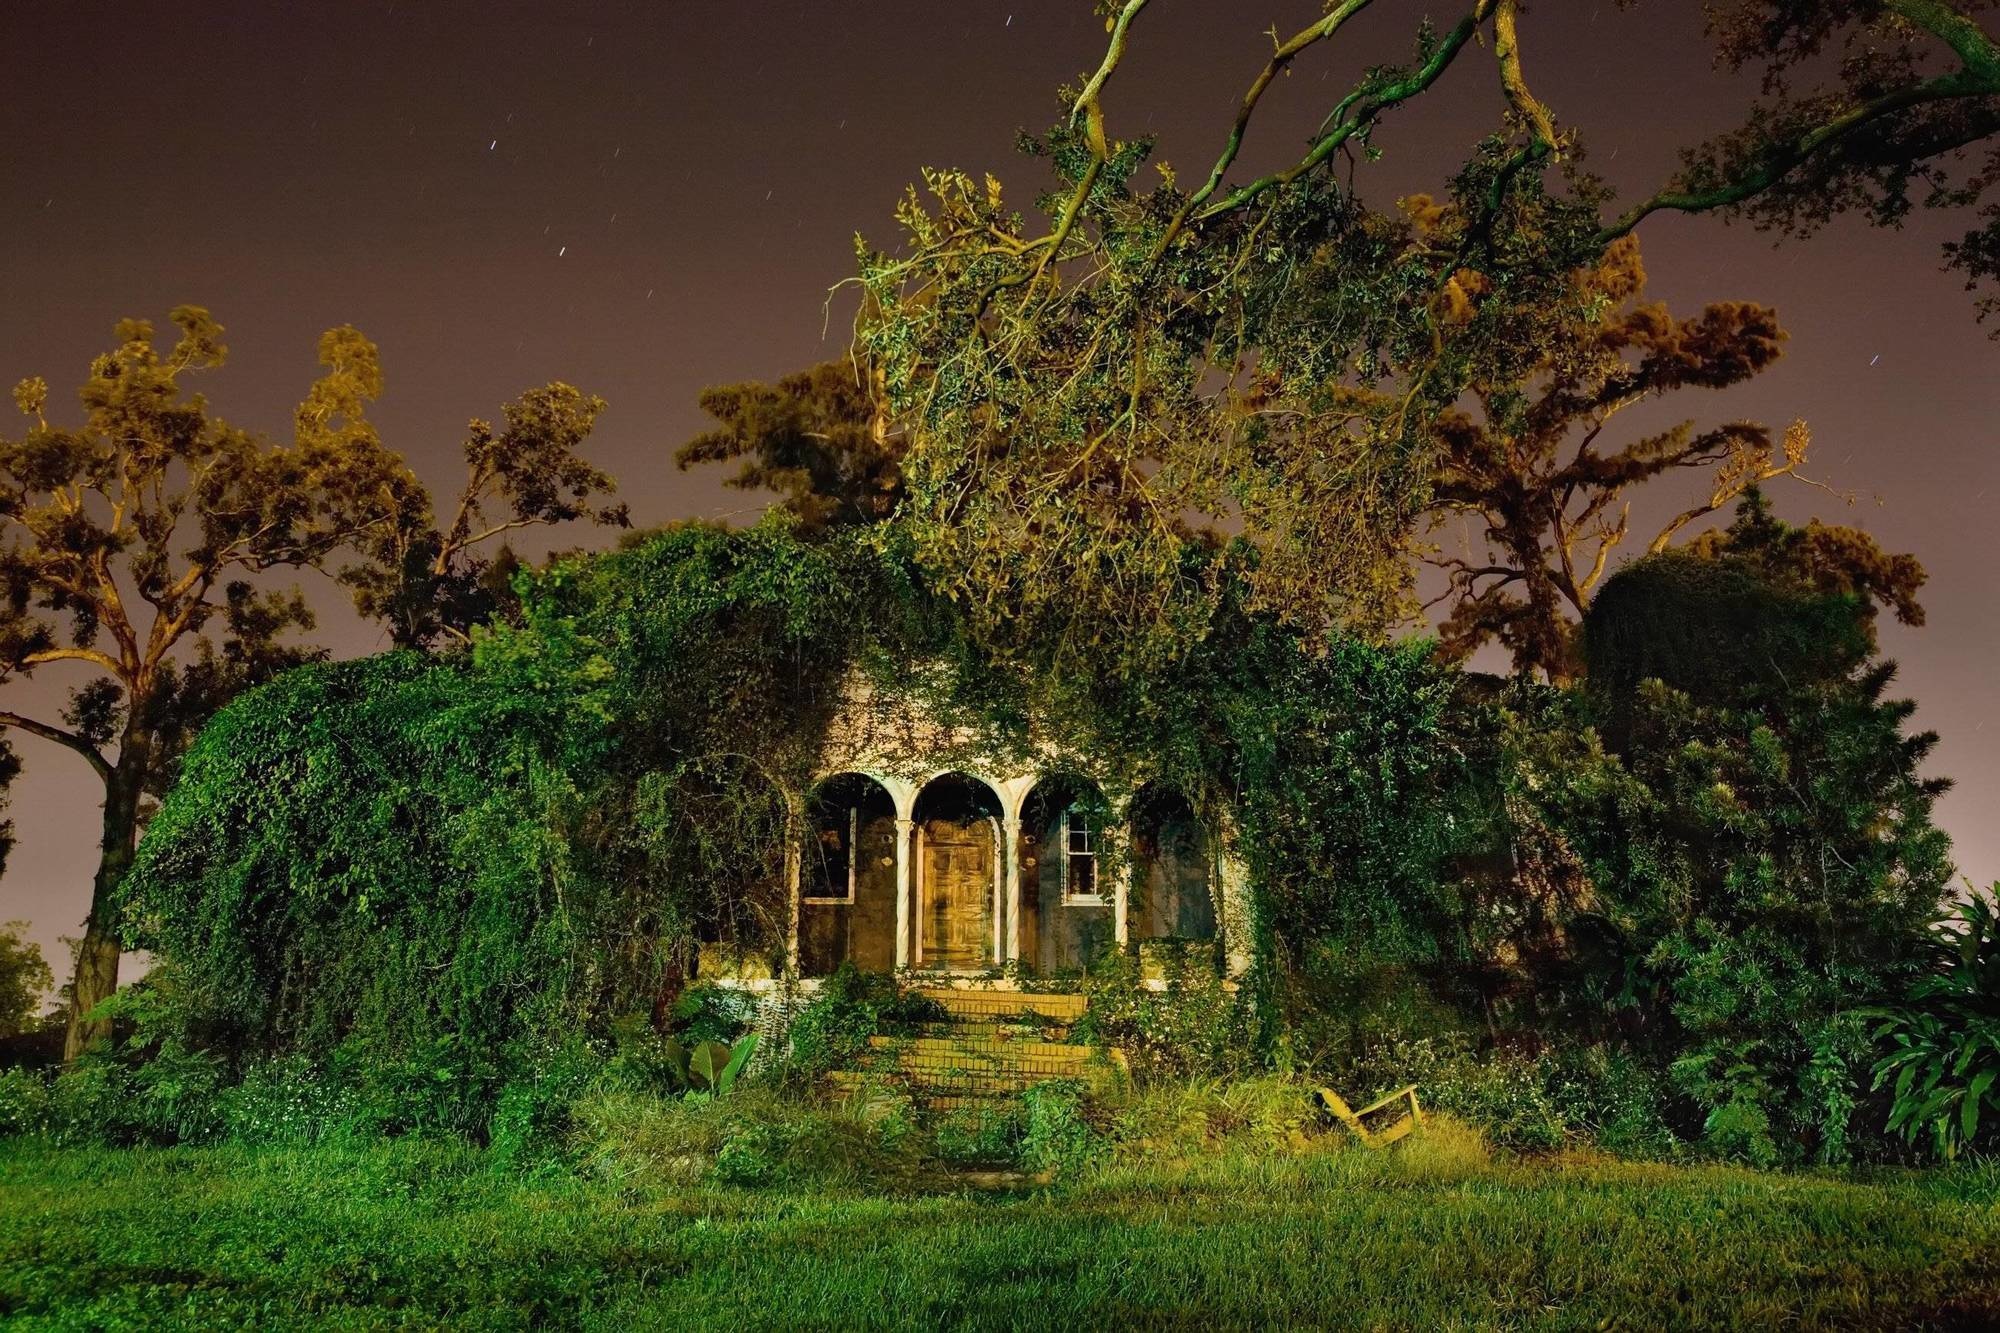 Greenery are the new tenants of this abandoned house in New Orleans.